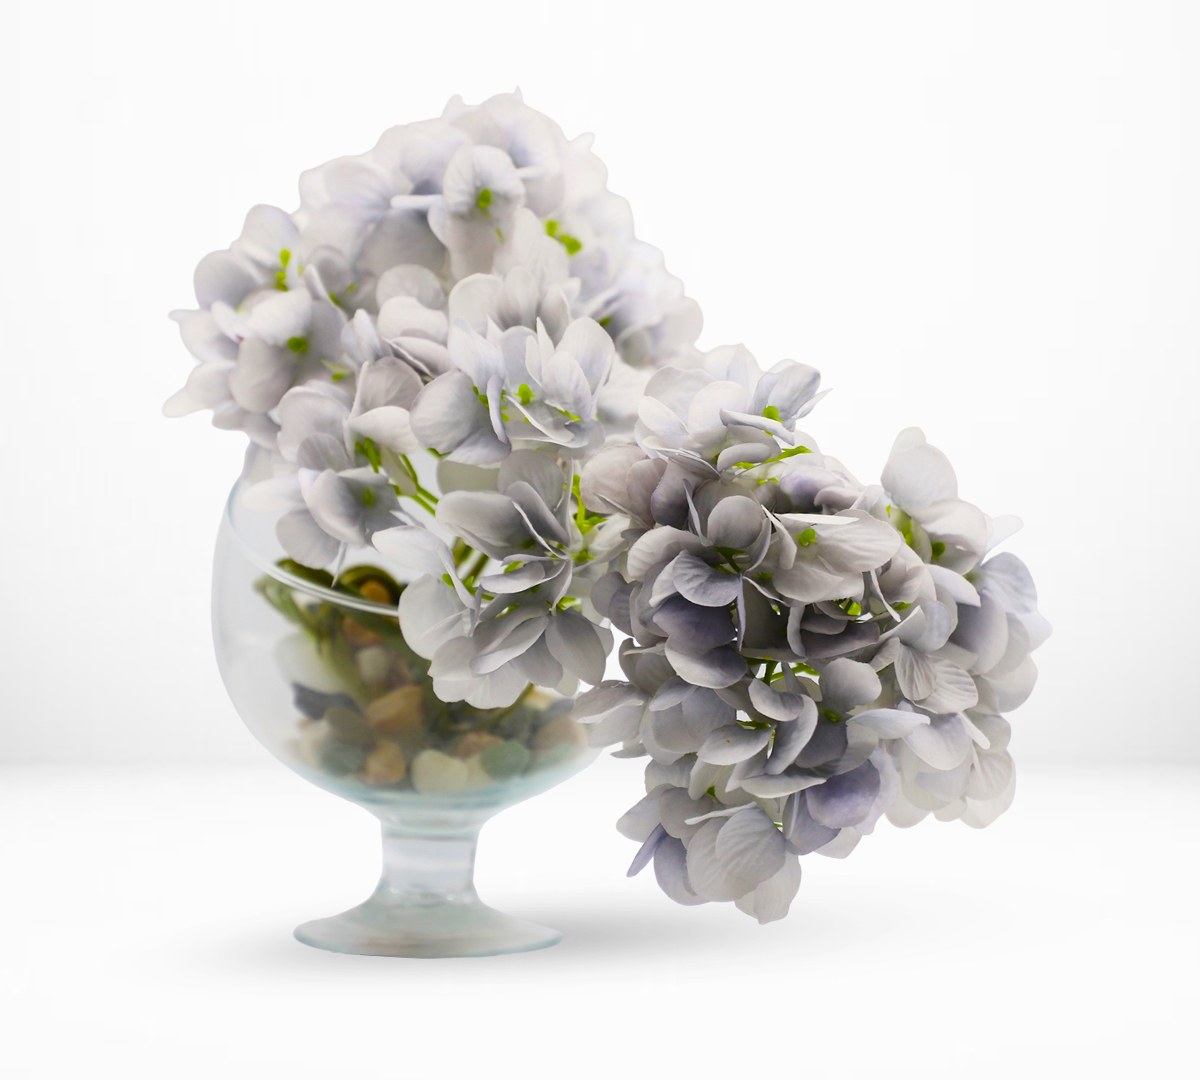 Decorative Glass Vase Filled With Artificial Flowers - Hand Arranged